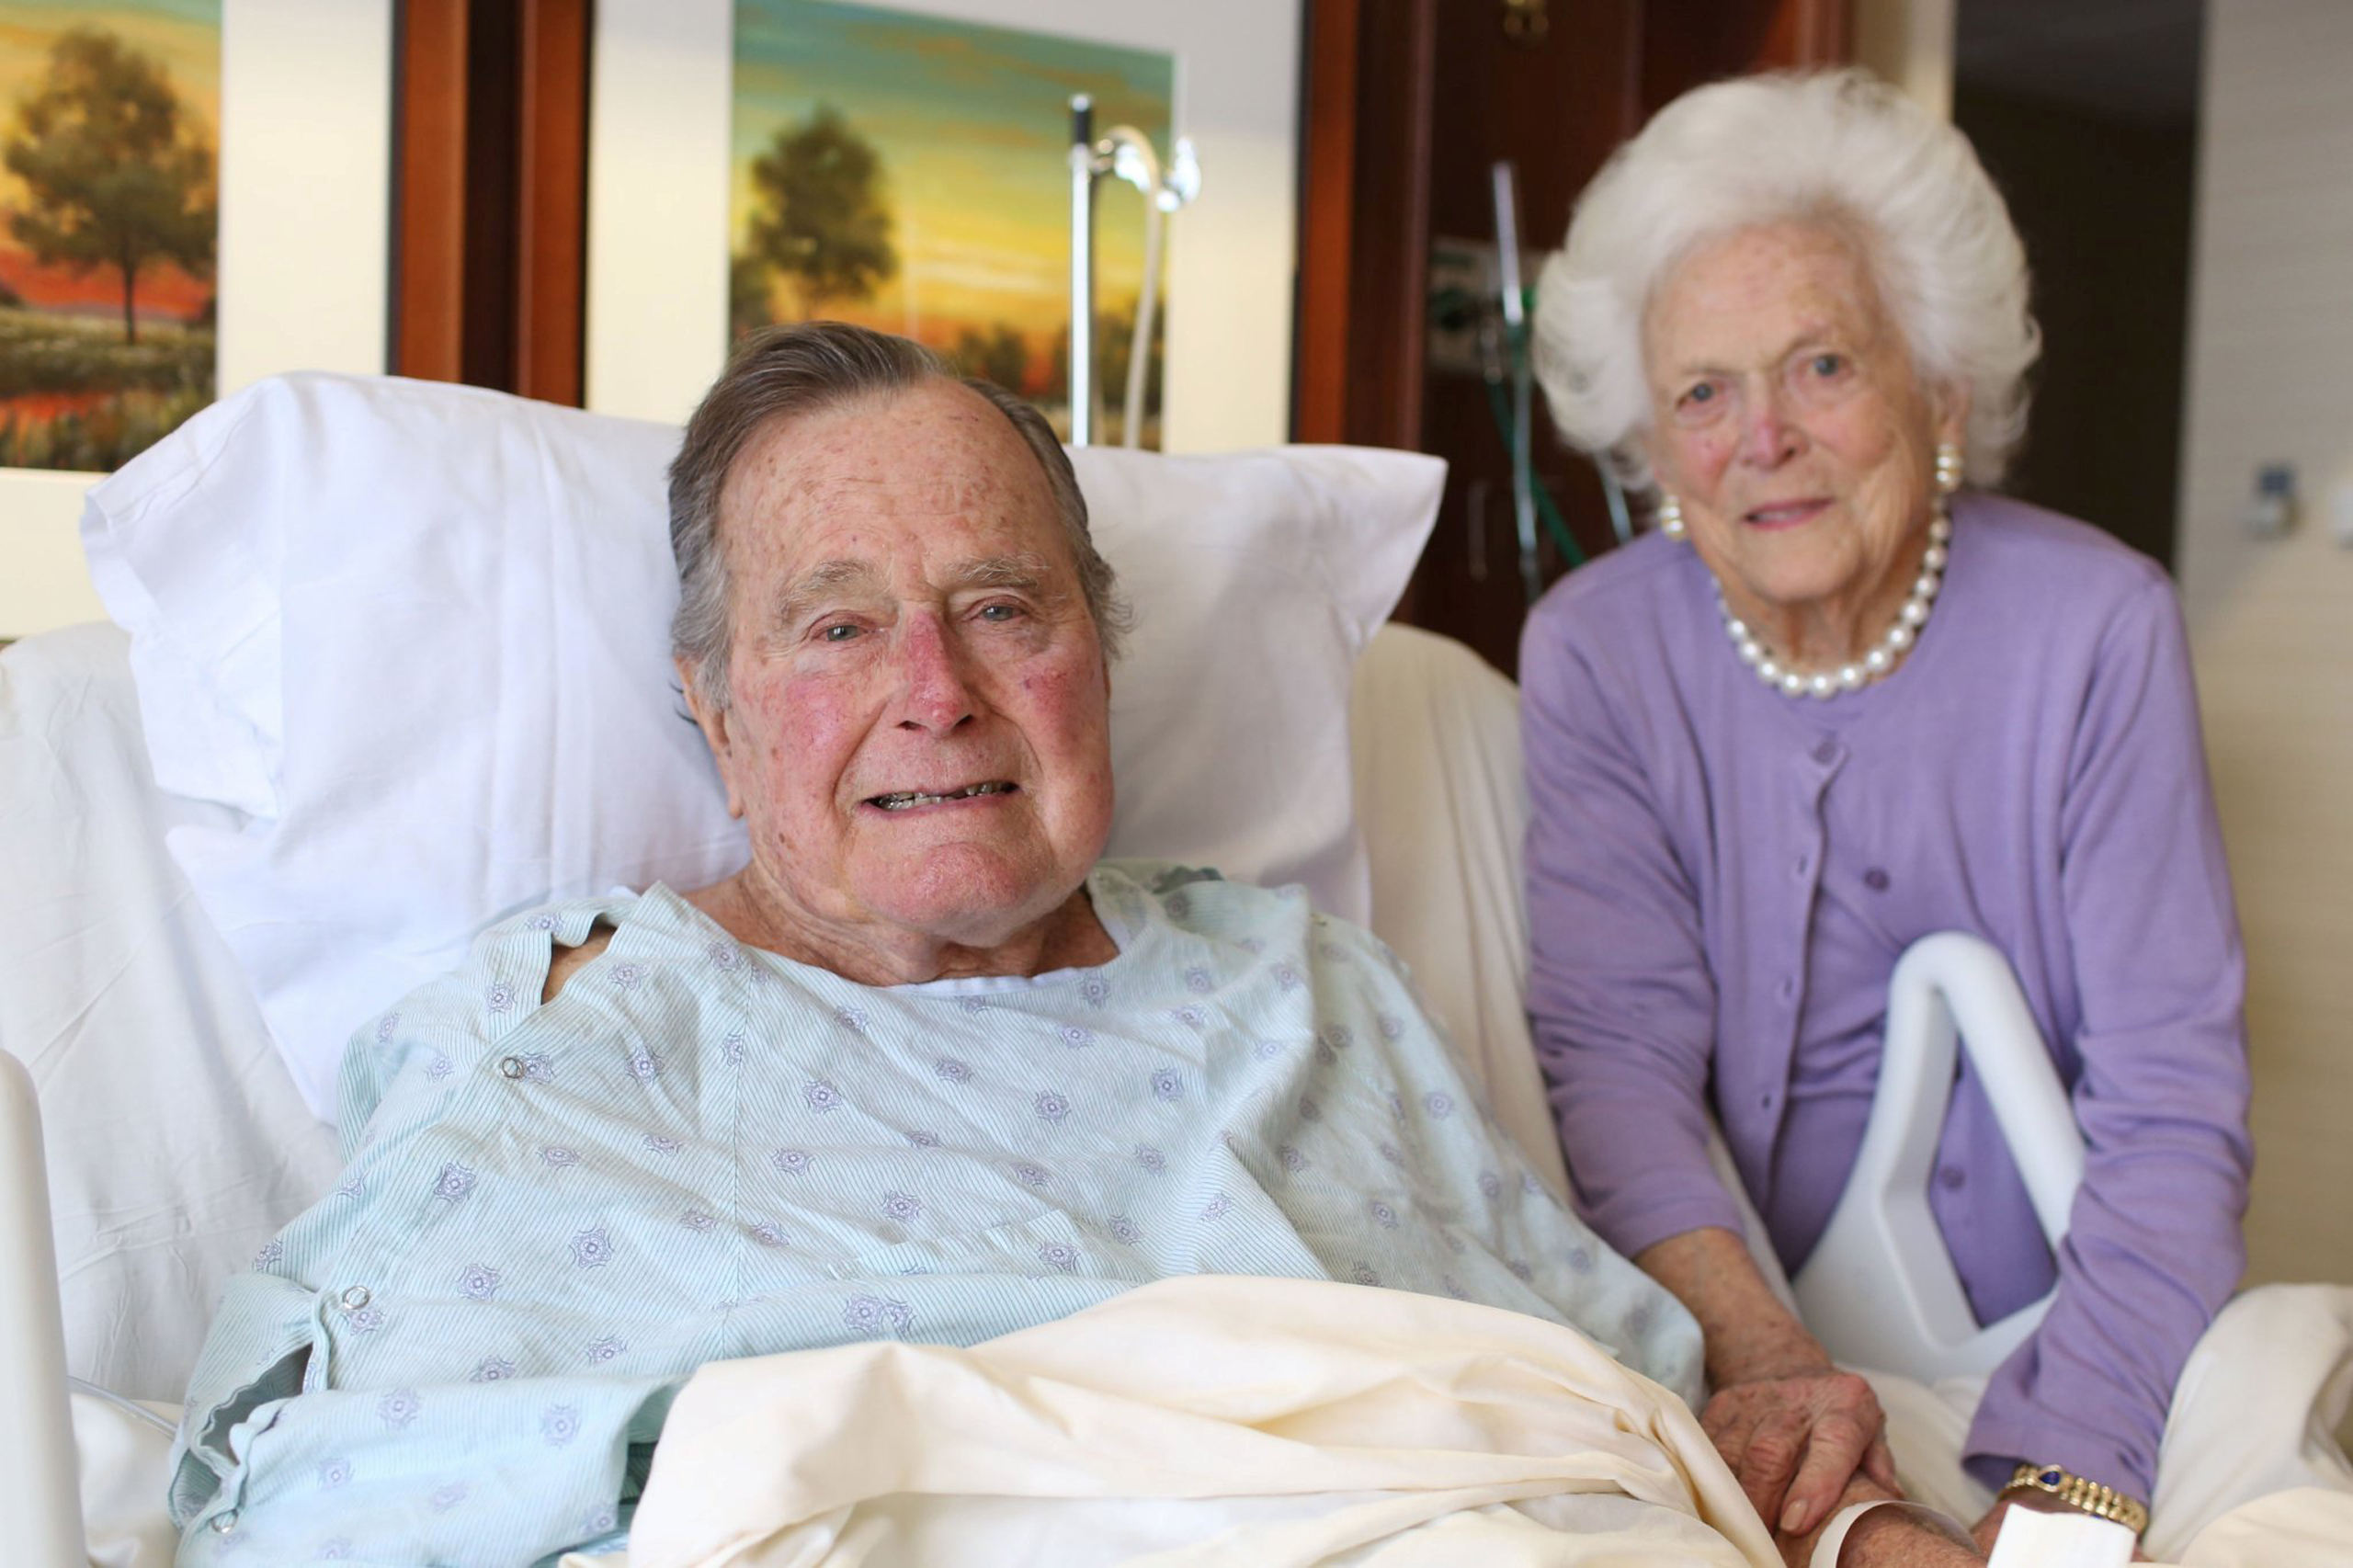 Former President George H.W. Bush and his wife Barbara Bush are pictured in Houston Methodist Hospital in Houston on Jan. 23, 2017. (Jim McGrath—Reuters)